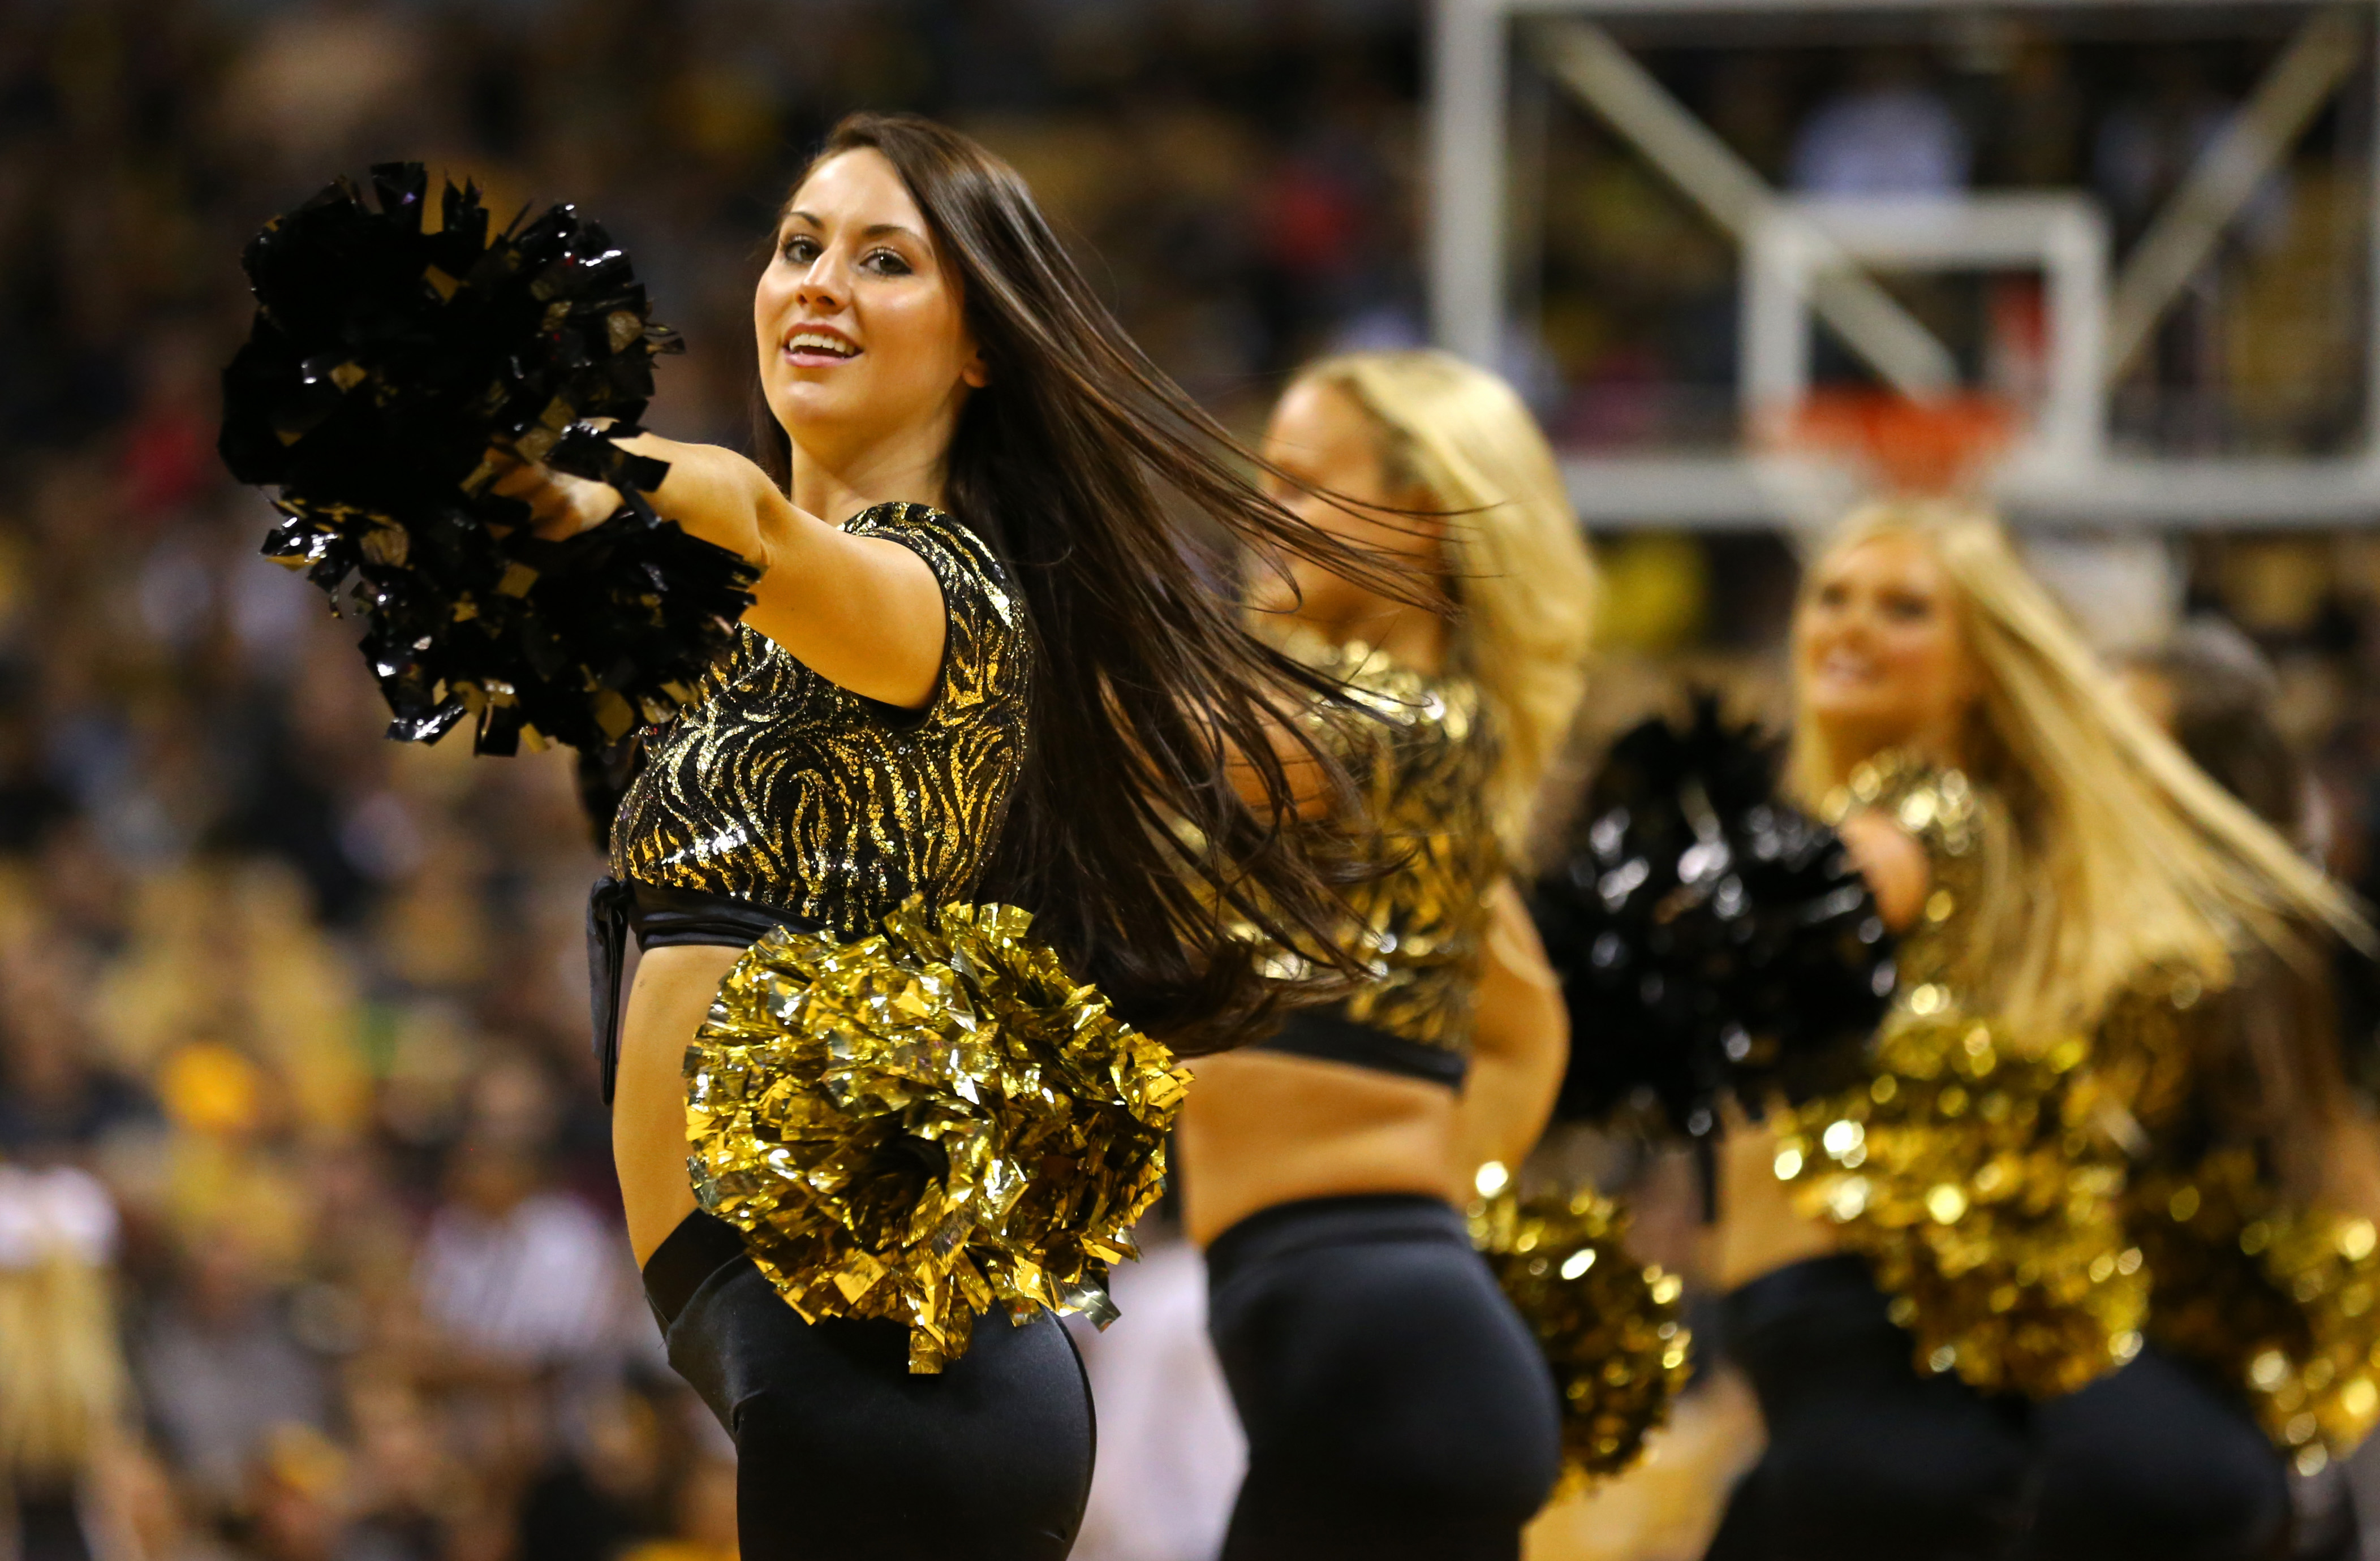 Nov 13, 2017; Columbia, MO, USA; Missouri Tigers cheerleaders perform in the first half of the game against the Wagner Seahawks at Mizzou Arena. Mandatory Credit: Jay Biggerstaff-USA TODAY Sports